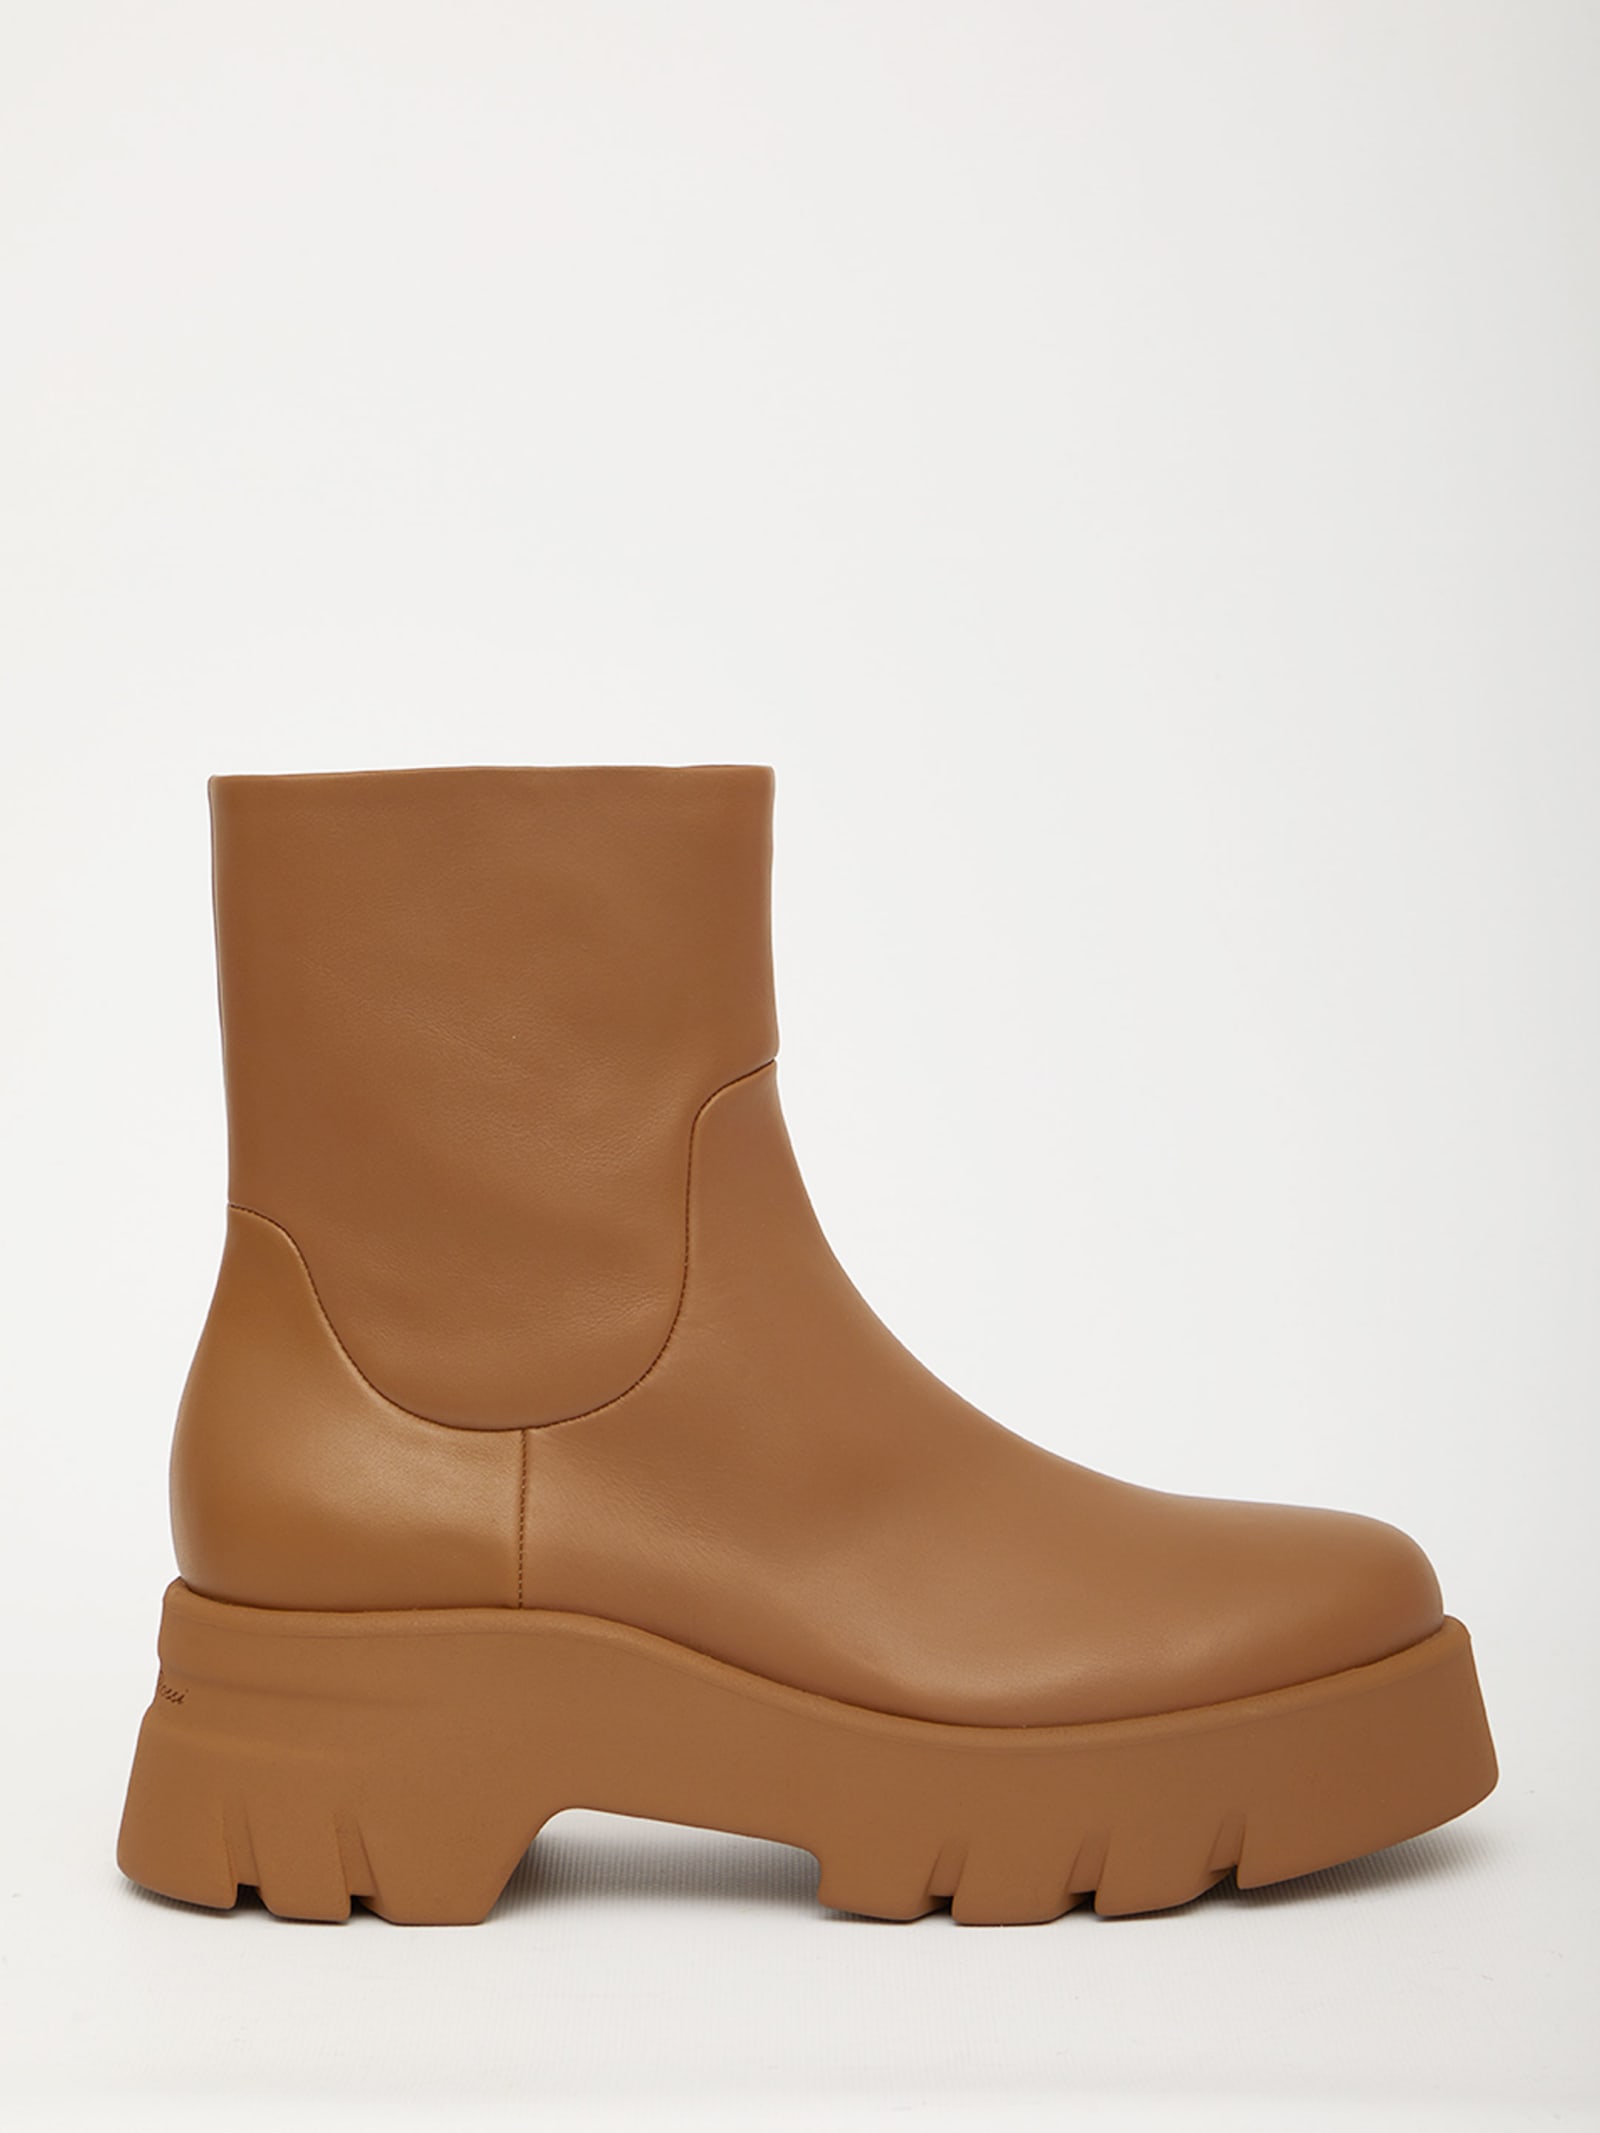 Gianvito Rossi Montey Camel Ankle Boots